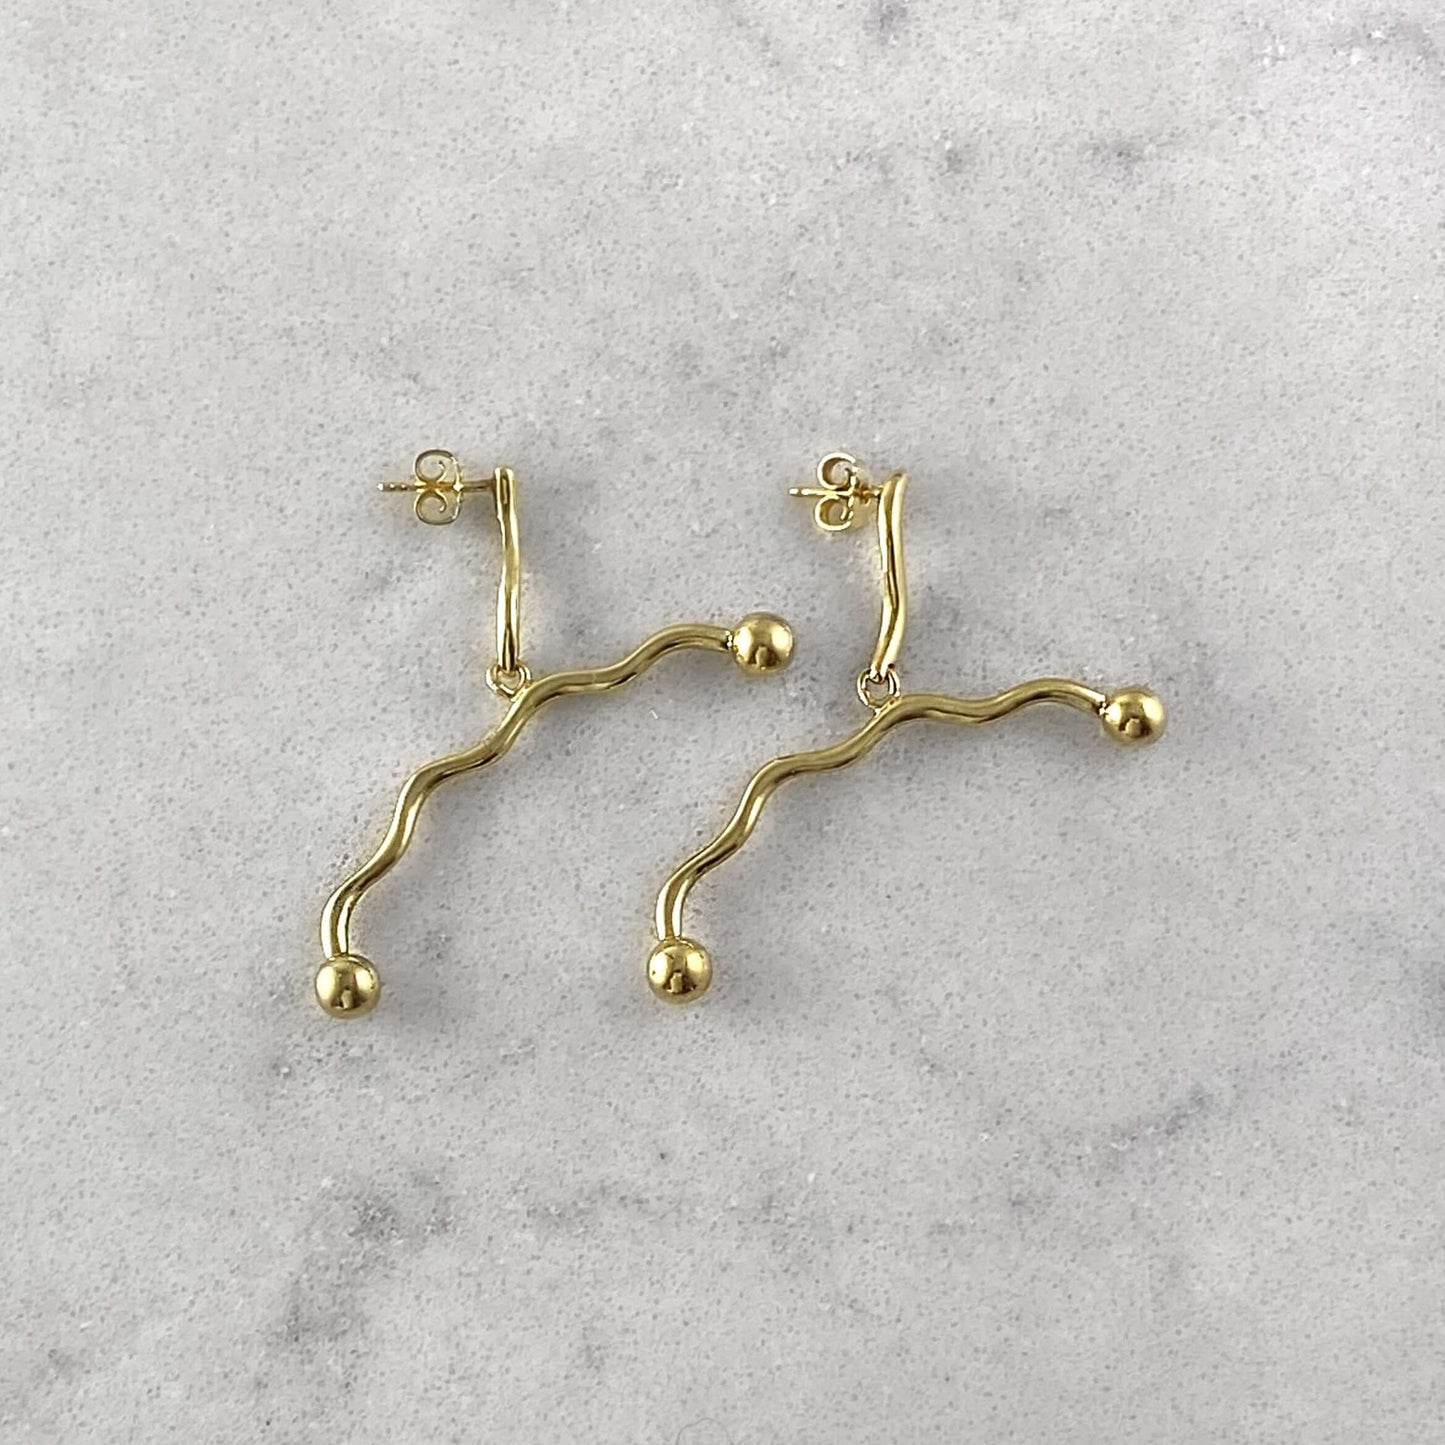 Product photo of gold plated earrings by Aur Studio